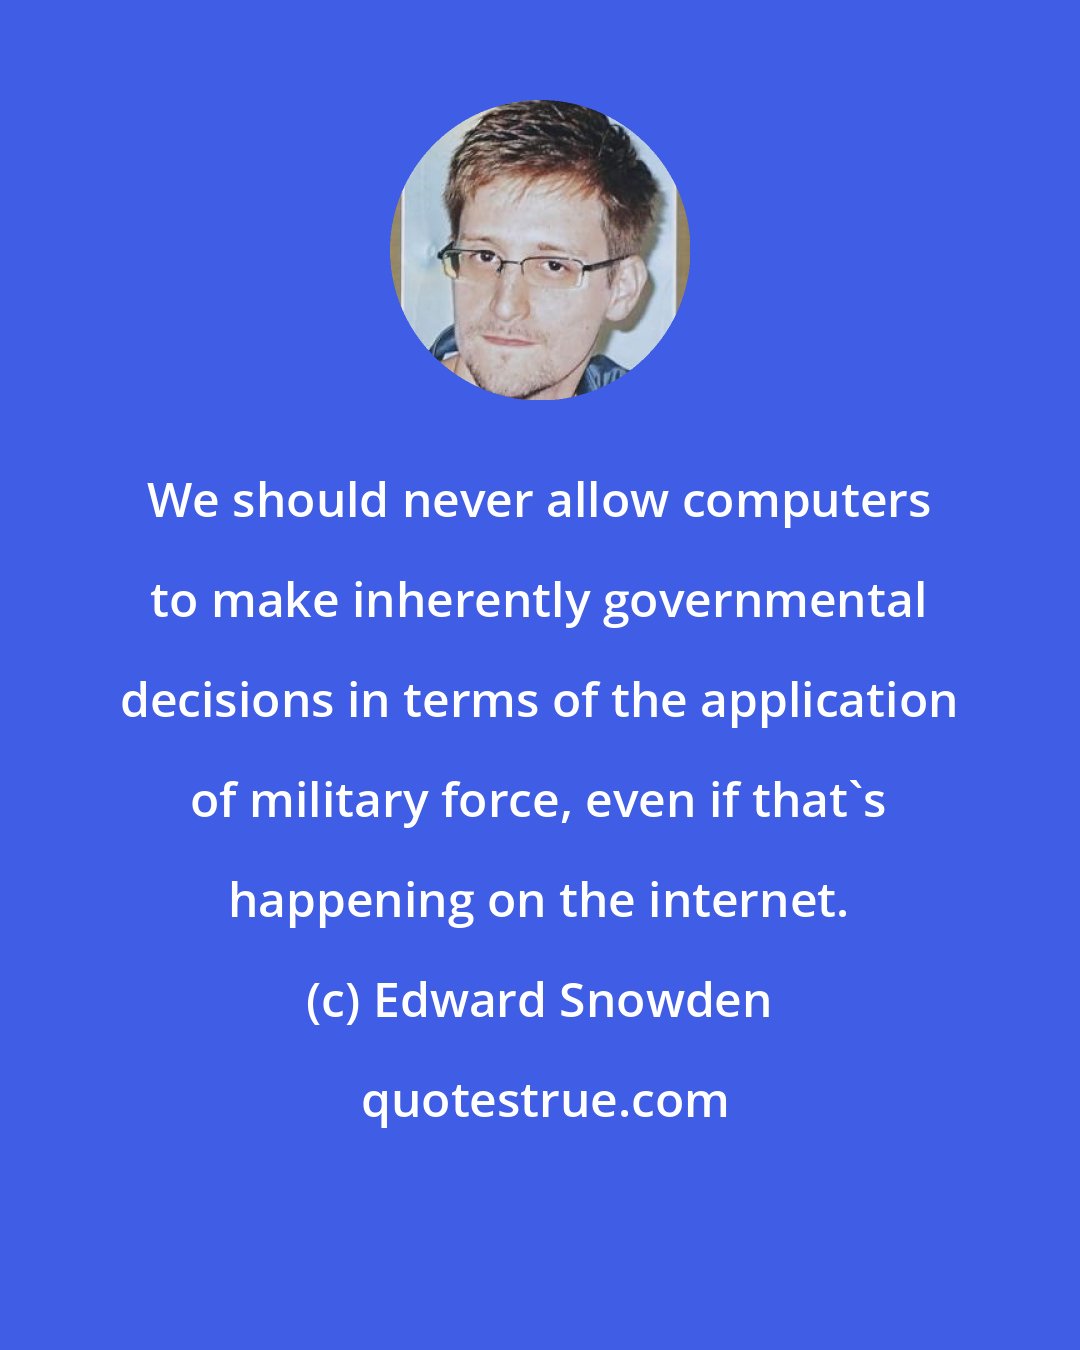 Edward Snowden: We should never allow computers to make inherently governmental decisions in terms of the application of military force, even if that's happening on the internet.